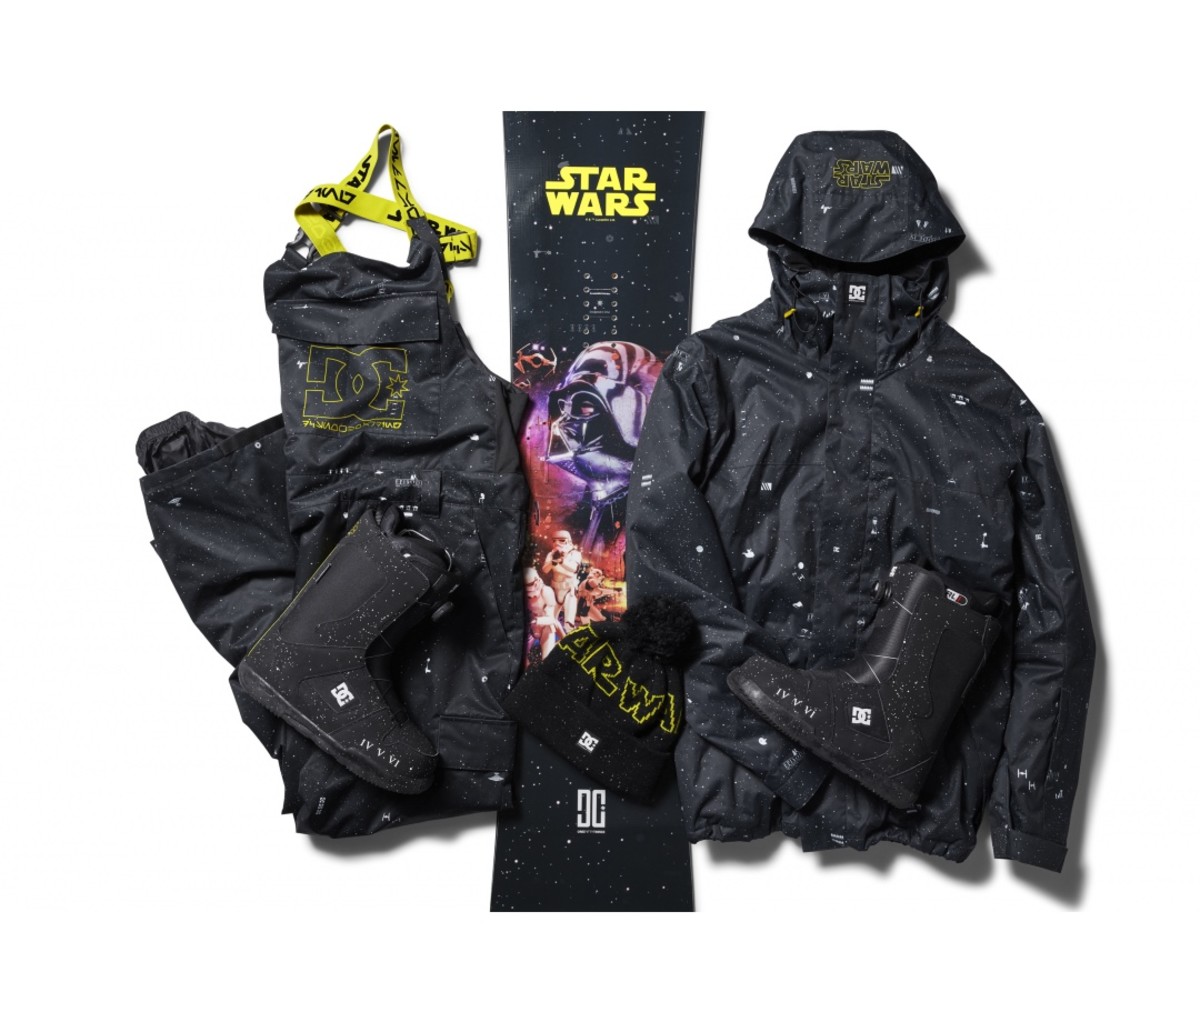 DC Shoes and 'Star Wars' Join Forces on Snowboard Gear Collection